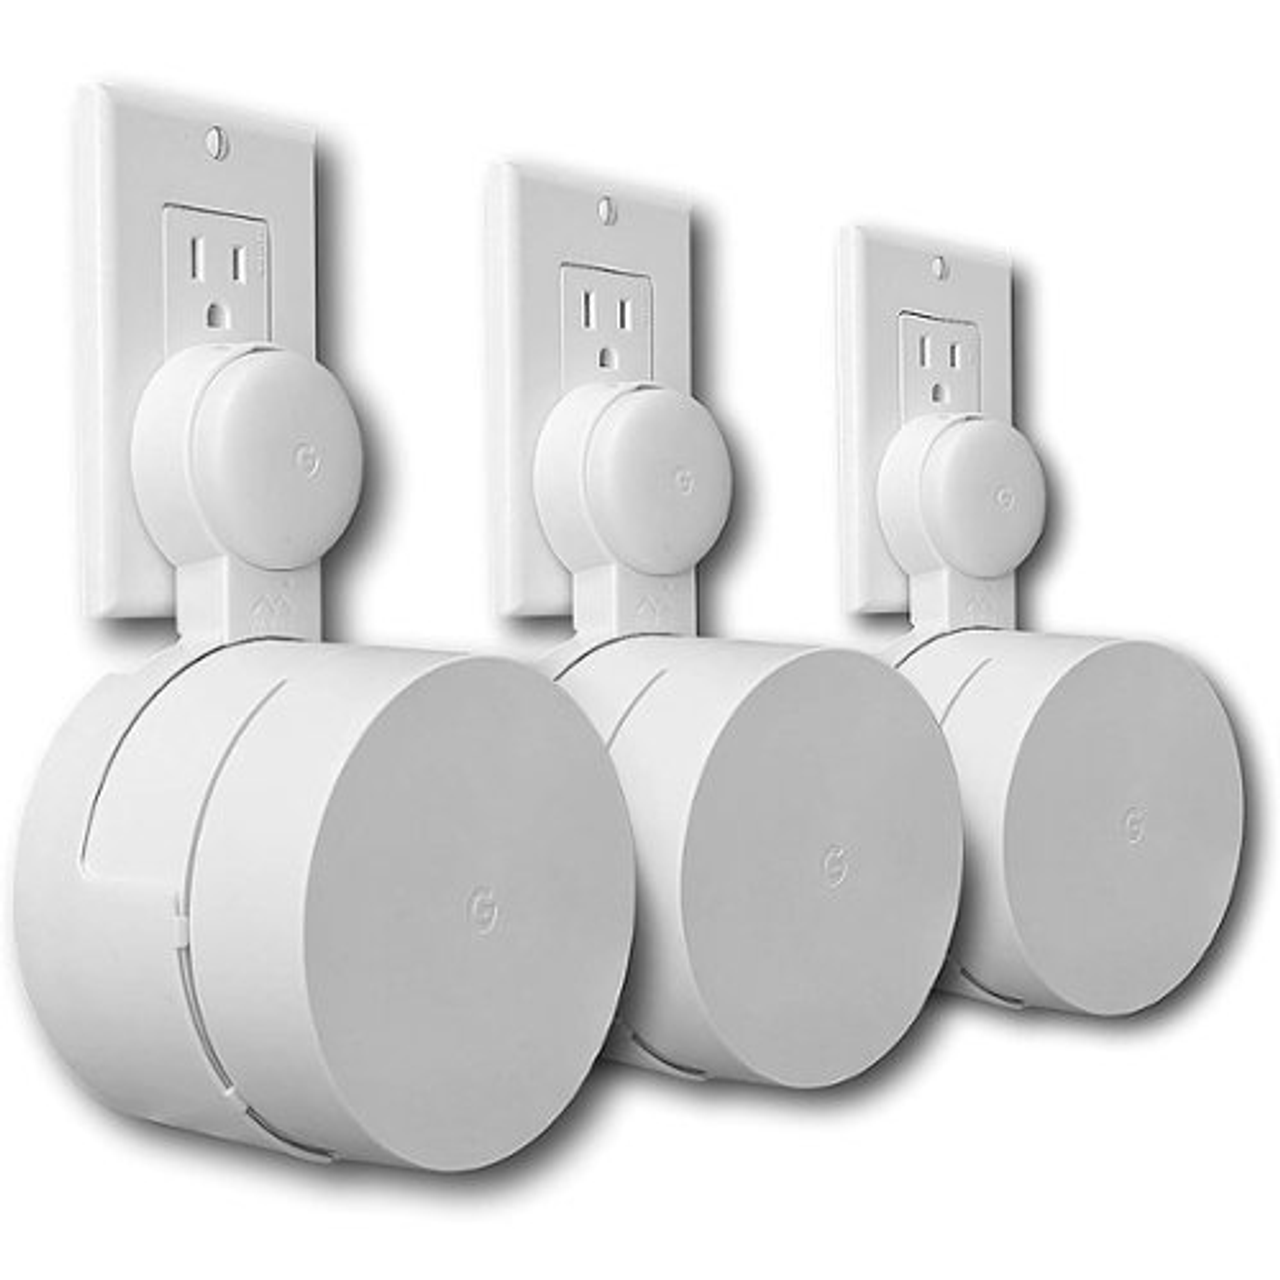 Mount Genie - Outlet Mount for Google Wifi AC1200 - Round Plug - 3-pack